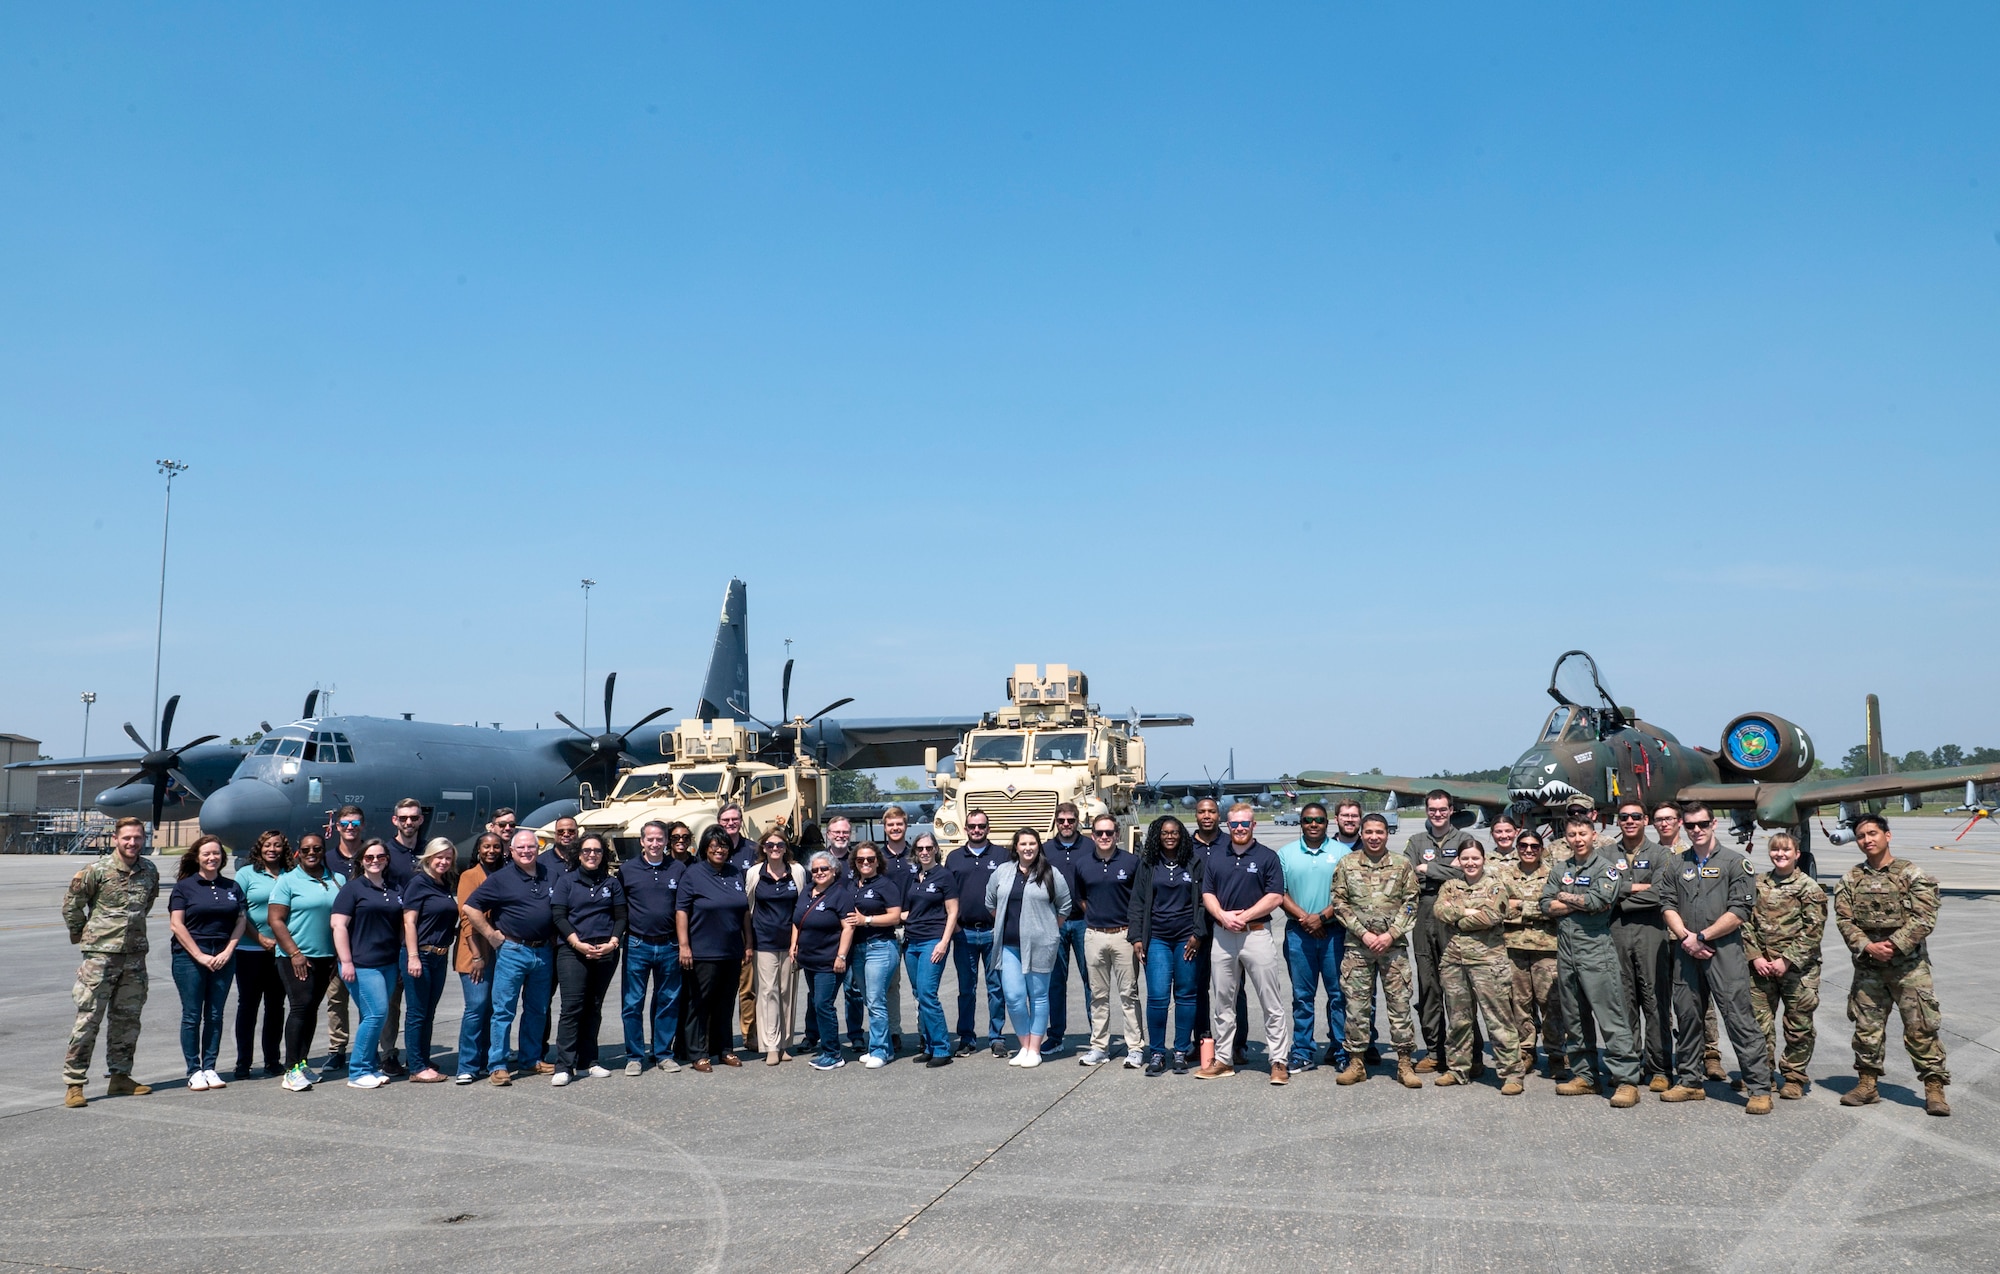 The Leadership Lowndes class of 2024 and U.S. Air Force Airmen assigned to various units take a group photo at Moody Air Force Base, Georgia, March 21, 2024. Local leaders were able to interact with various weapon systems and speak with the Airmen to learn about their missions and capabilities. (U.S. Air Force photo by Airman 1st Class Leonid Soubbotine)